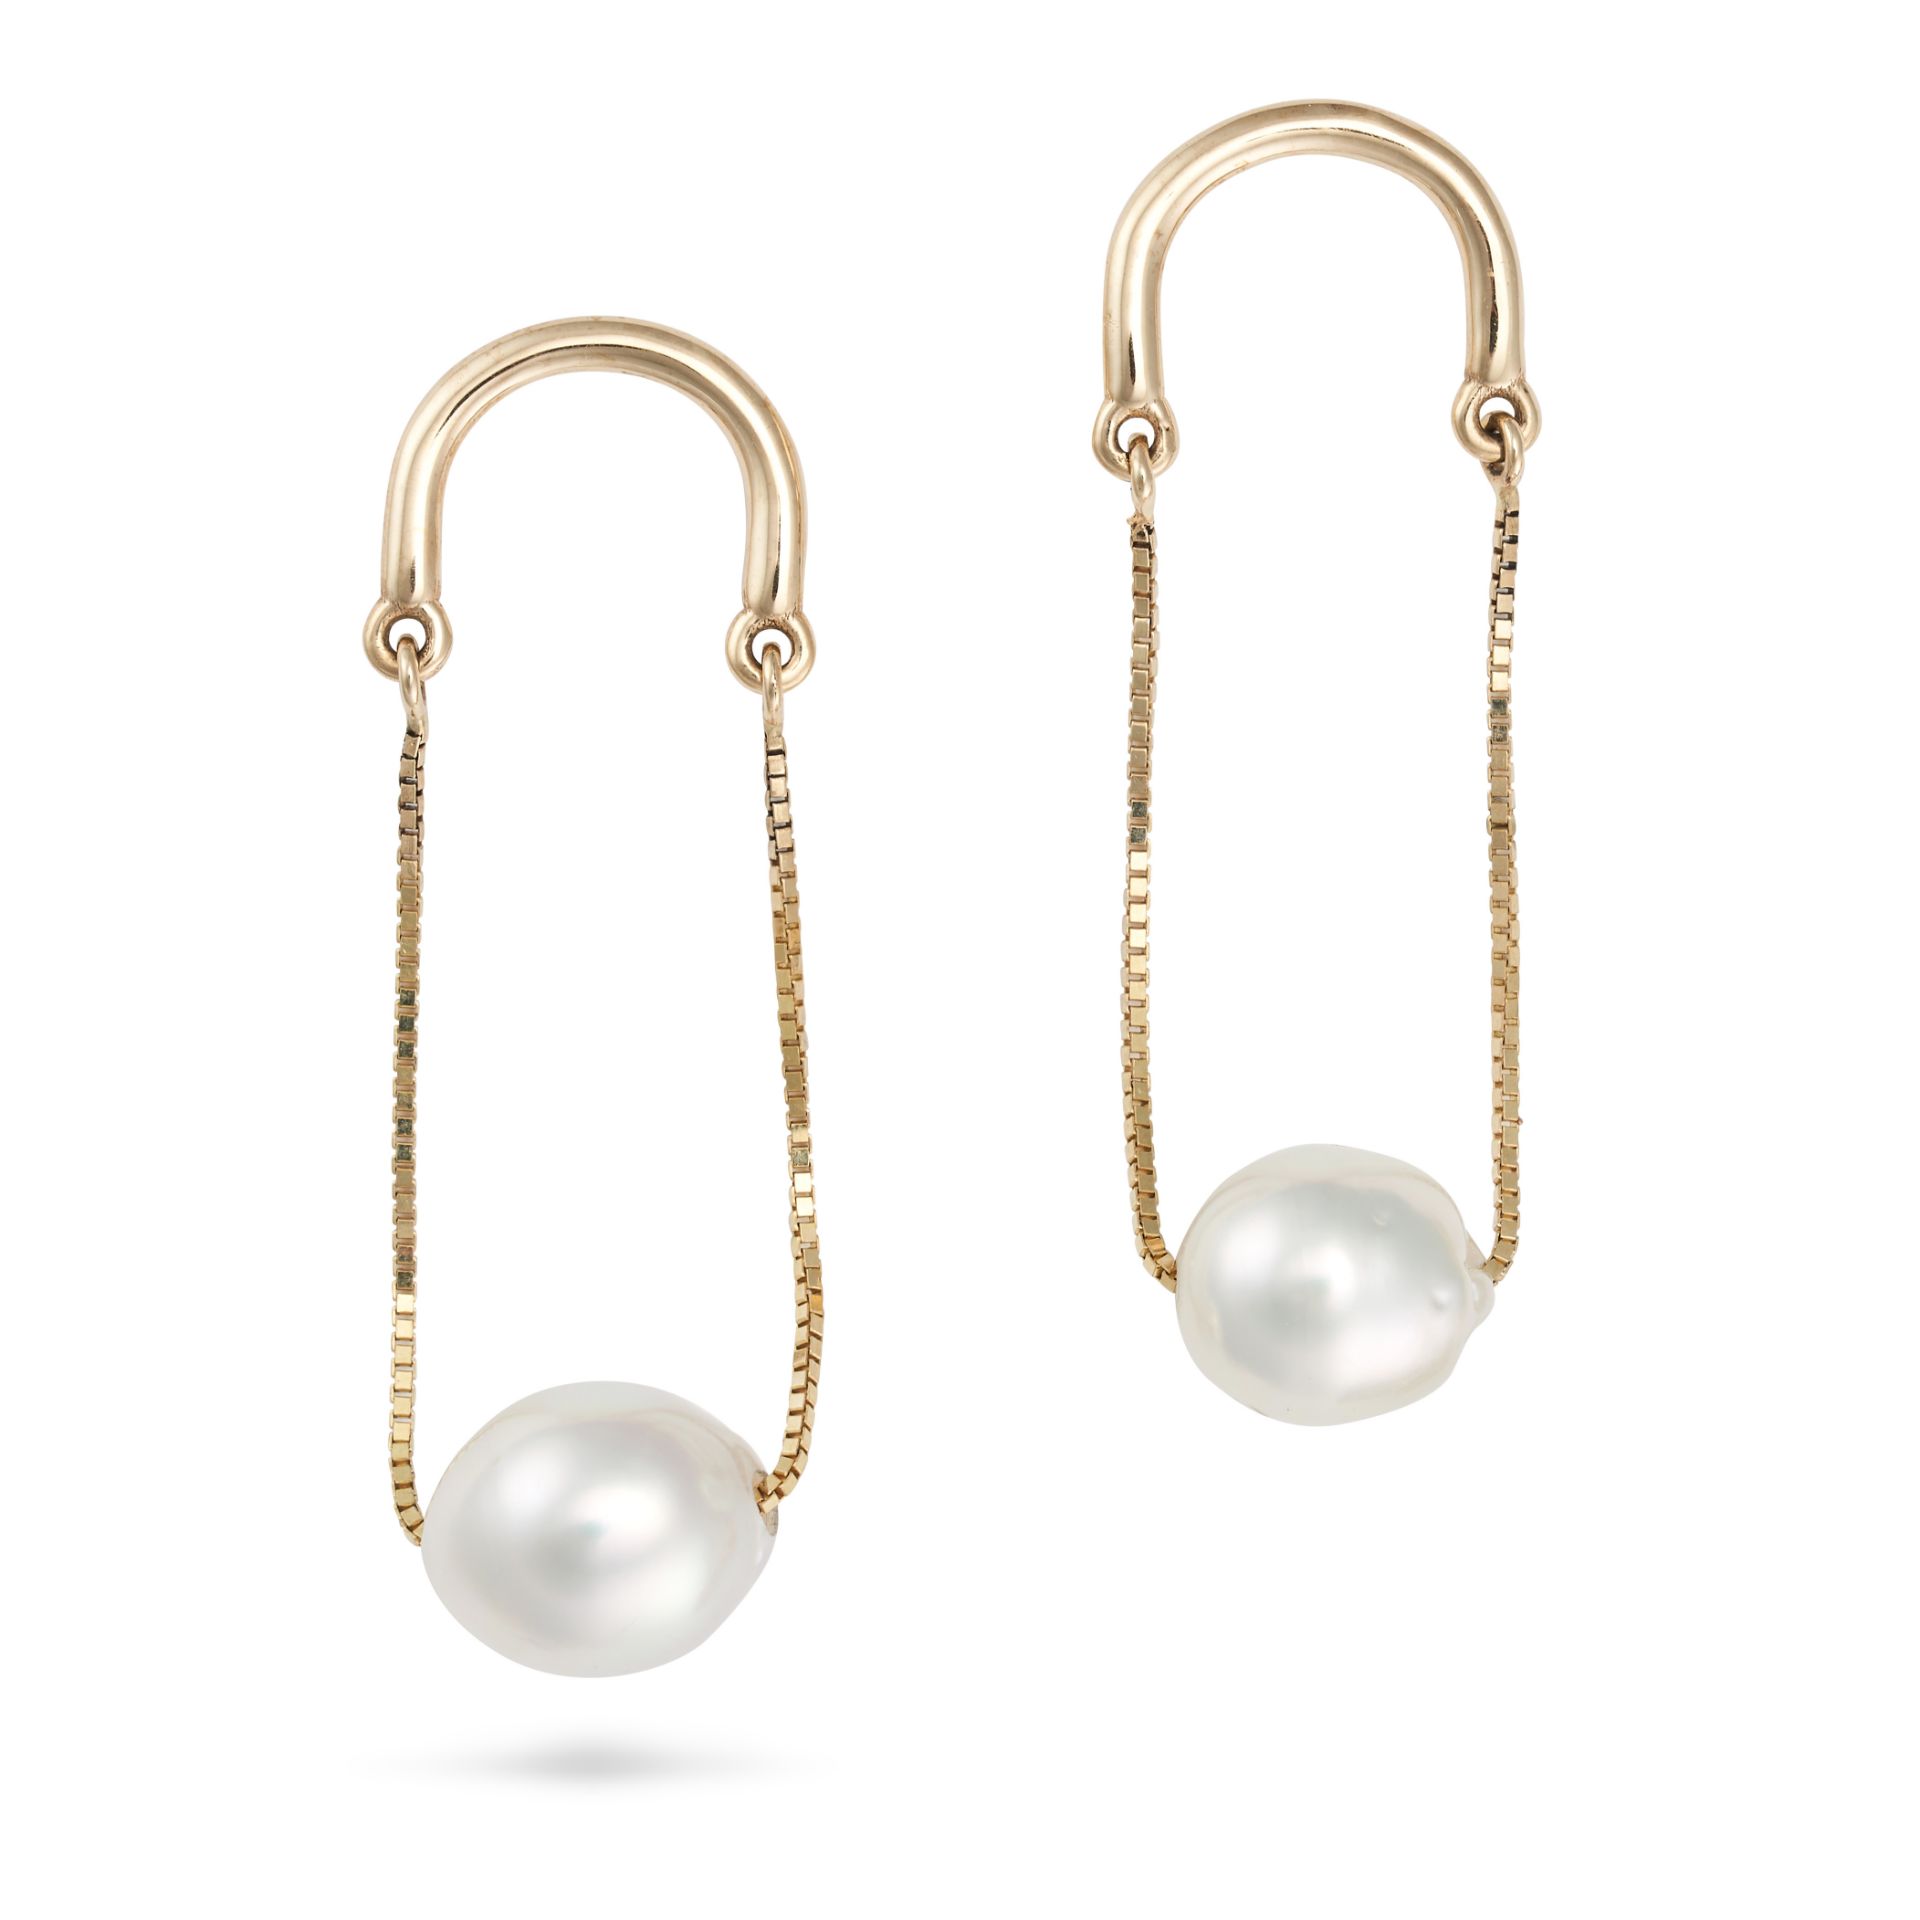 A PAIR OF PEARL DROP EARRINGS in 9ct yellow gold, comprising two rows of box chain suspending a p...